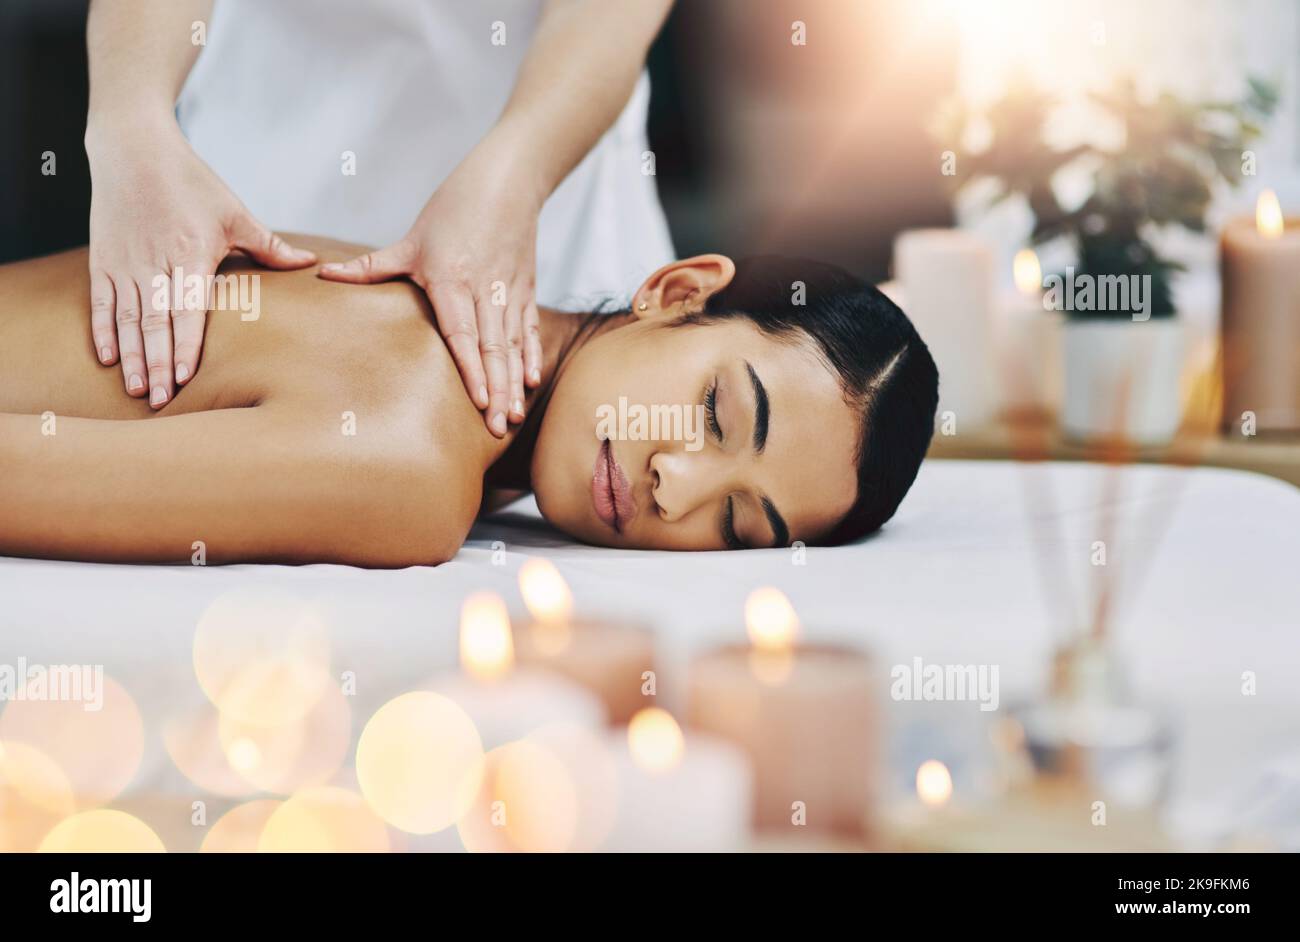 Getting rid of all the tension. a relaxed an cheerful young woman getting a massage indoors at a spa. Stock Photo